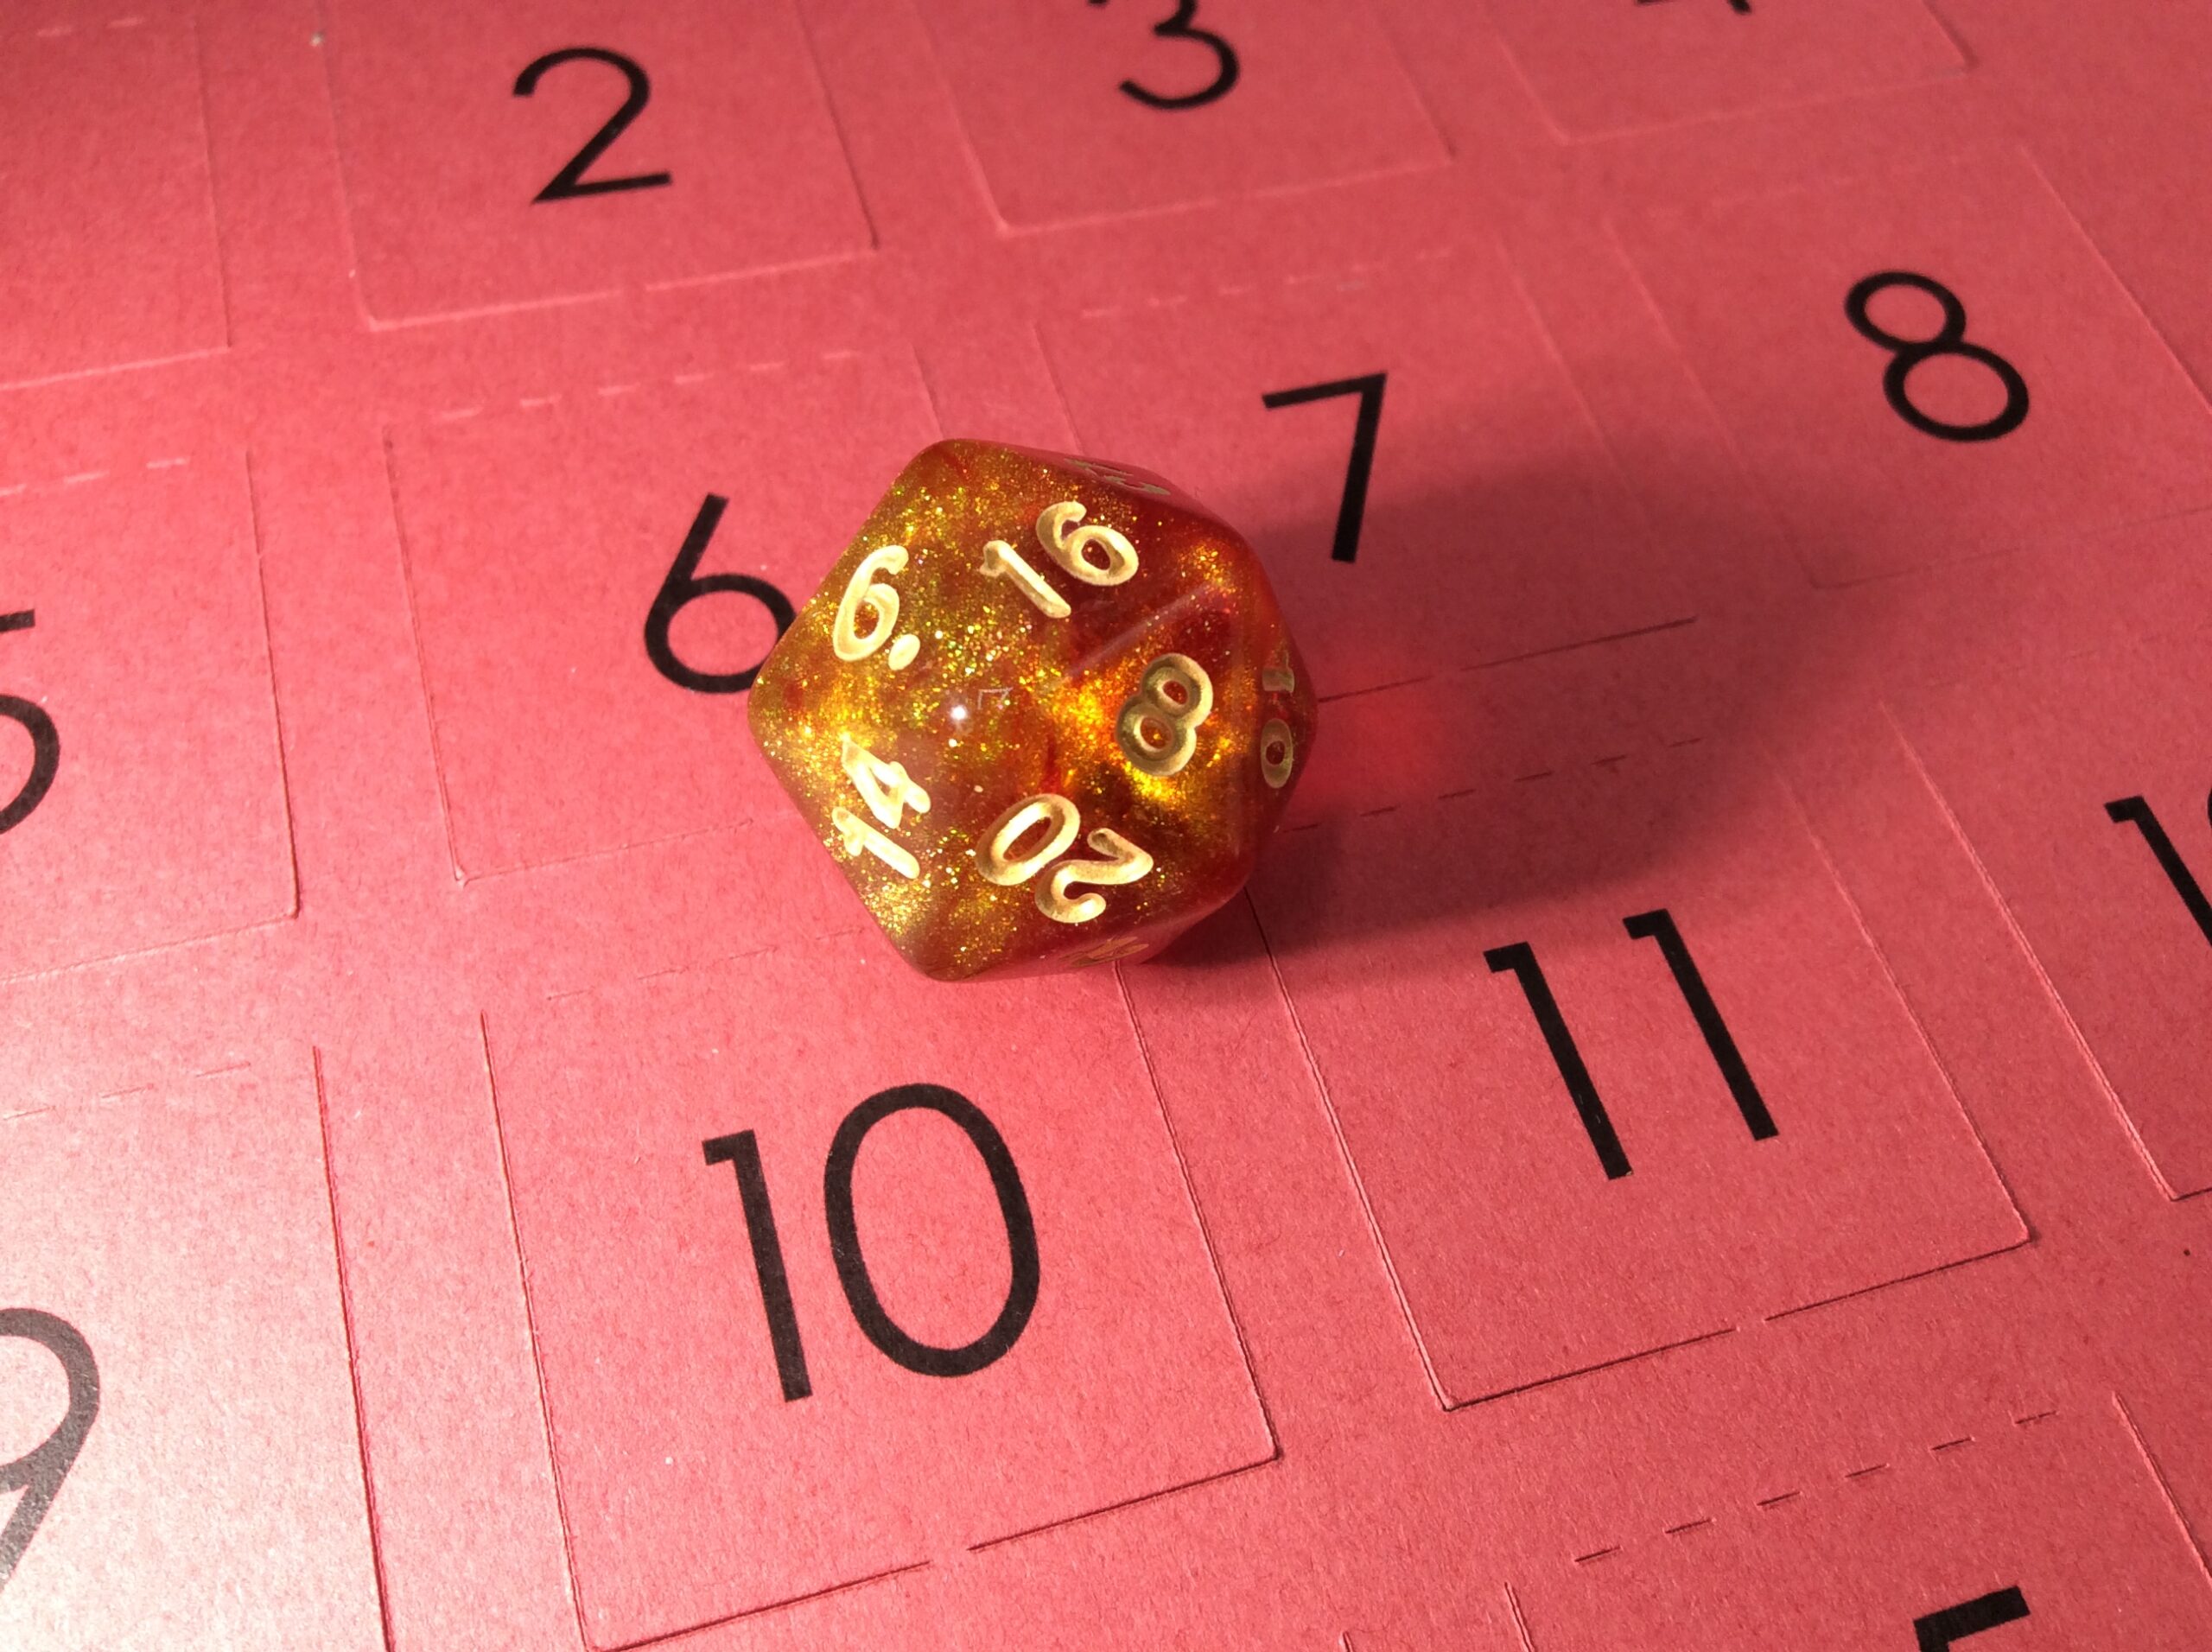 The 2020 dice countdown calendars are here!